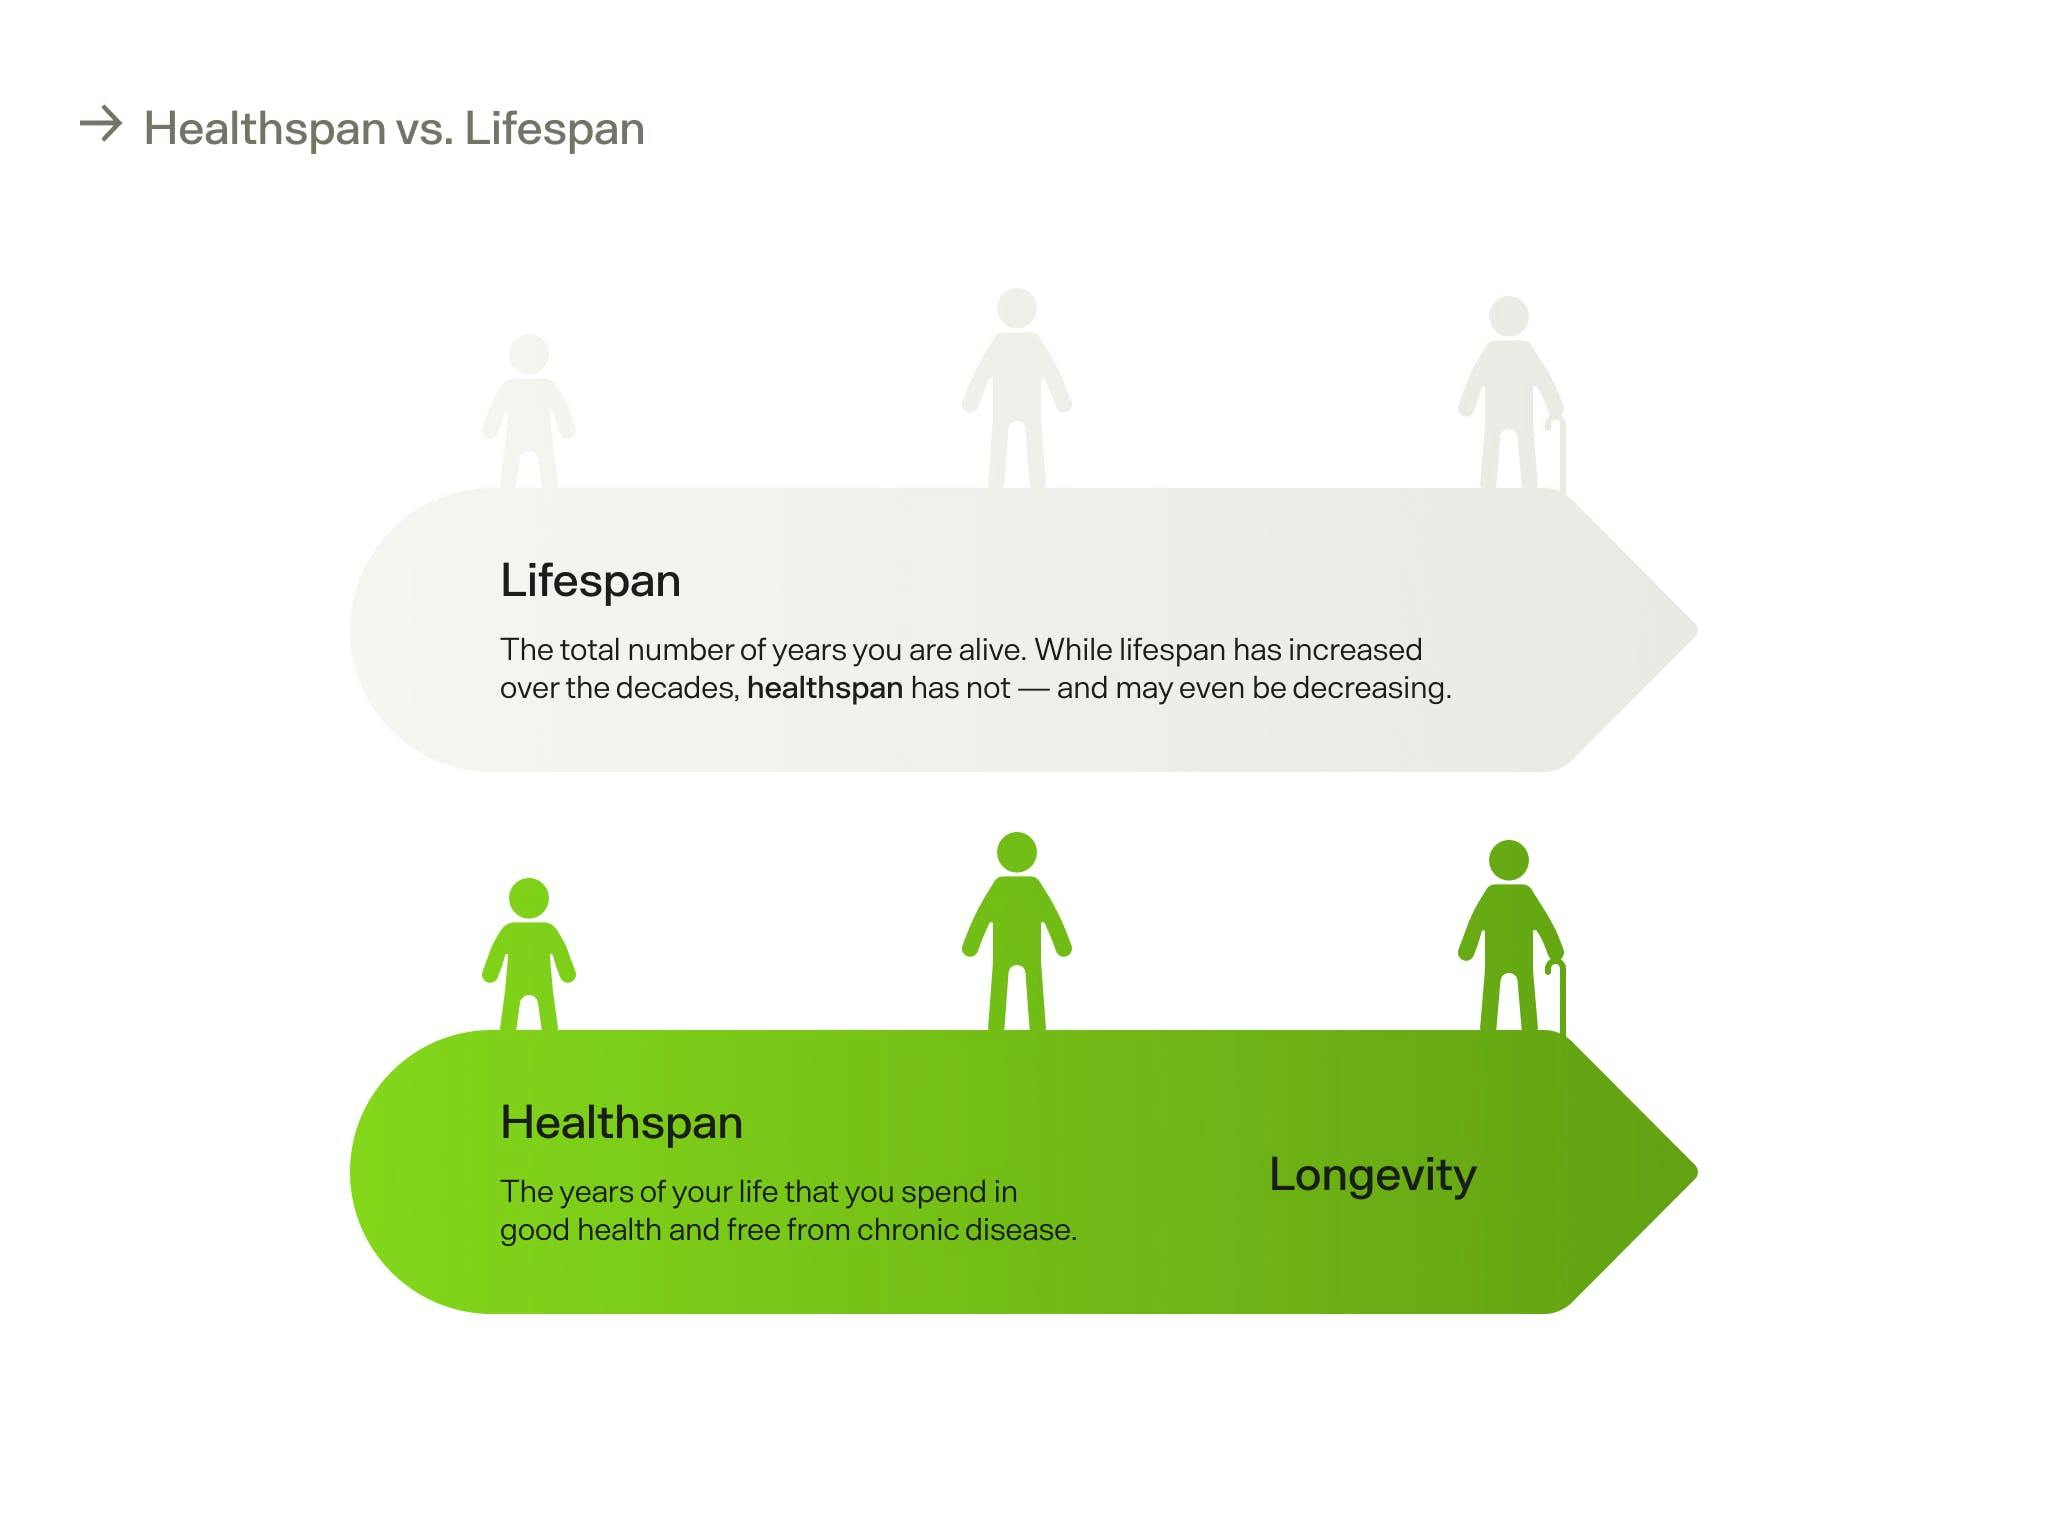 graphic showing difference between lifespan and healthspan